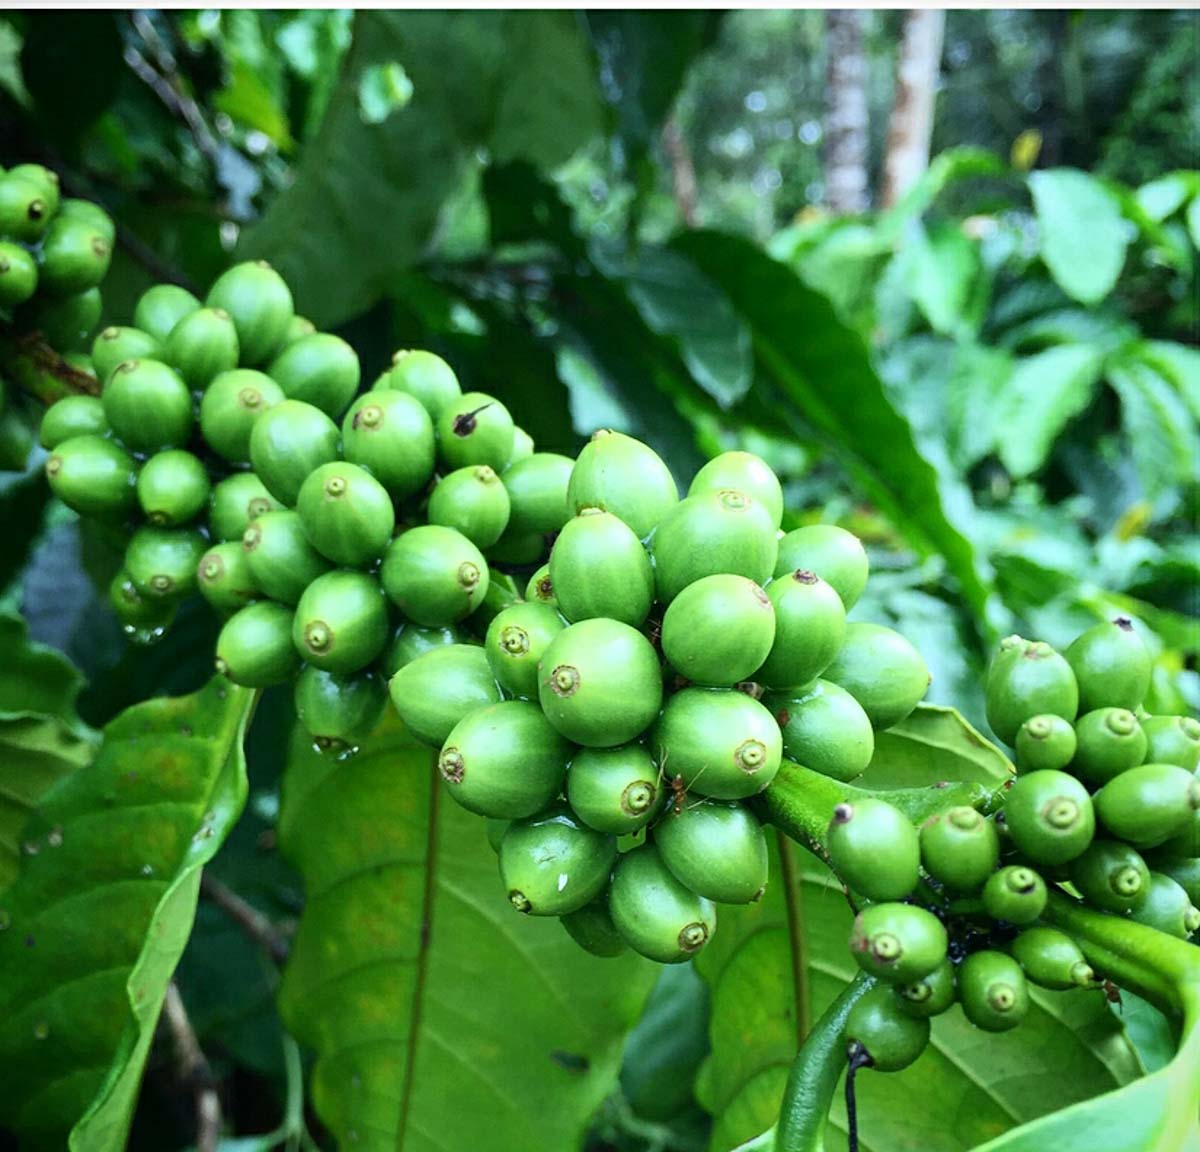 Raw coffee seeds in the Coffee Plantations of Coorg